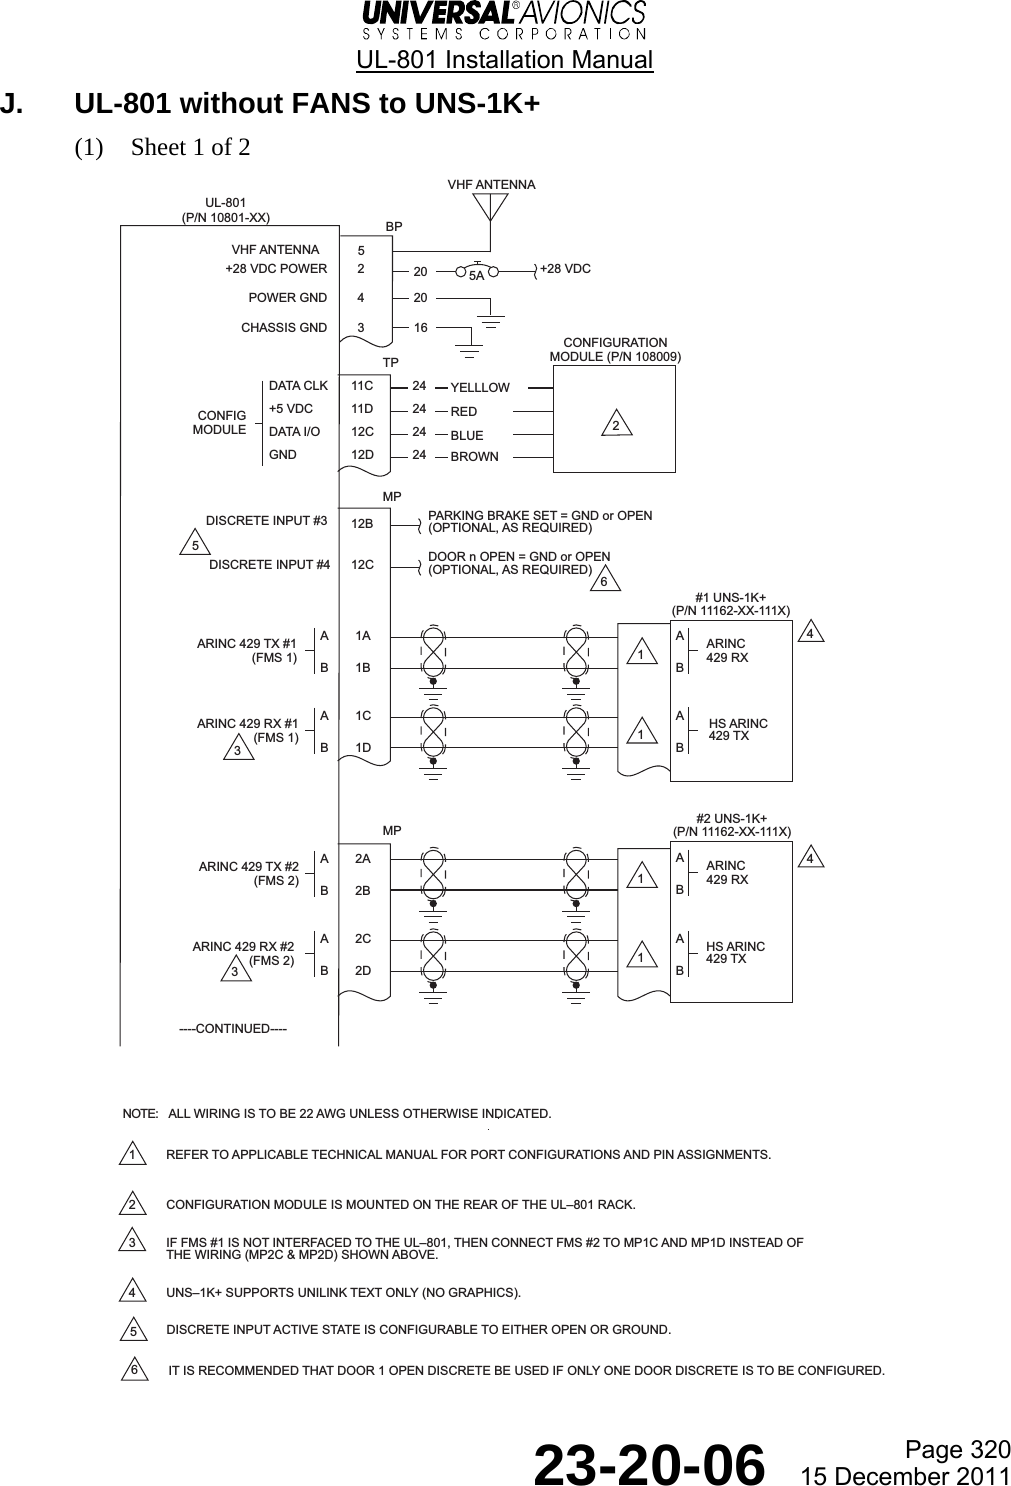  UL-801 Installation Manual  Page 320  23-20-06  15 December 2011 J.  UL-801 without FANS to UNS-1K+ (1) Sheet 1 of 2    UL-801(P/N 10801-XX)A1AB1BARINC 429 TX #1(FMS 1)#1 UNS-1K+(P/N 11162-XX-111X)BP2+28 VDC4+28 VDC POWERPOWER GNDCHASSIS GND 35ATP11C 2411D 2412C 2412D 24DATA CLK+5 VDCDATA I/OGNDCONFIGMODULEMP12B PARKING BRAKE SET = GND or OPEN(OPTIONAL, AS REQUIRED)DISCRETE INPUT #4 12C DOOR n OPEN = GND or OPEN(OPTIONAL, AS REQUIRED)ABARINC429 RXA1CB1DARINC 429 RX #1(FMS 1)ABHS ARINC429 TX#2 UNS-1K+(P/N 11162-XX-111X)ABARINC429 RXA2CB2DARINC 429 RX #2(FMS 2)ABHS ARINC429 TXMP202016A2AB2BARINC 429 TX #2(FMS 2)DISCRETE INPUT #3441111YELLLOWREDBLUEBROWN32365CONFIGURATIONMODULE (P/N 108009)1 REFER TO APPLICABLE TECHNICAL MANUAL FOR PORT CONFIGURATIONS AND PIN ASSIGNMENTS.2 CONFIGURATION MODULE IS MOUNTED ON THE REAR OF THE UL801 RACK.3 IF FMS #1 IS NOT INTERFACED TO THE UL801, THEN CONNECT FMS #2 TO MP1C AND MP1D INSTEAD OFTHE WIRING (MP2C &amp; MP2D) SHOWN ABOVE.4 UNS1K+ SUPPORTS UNILINK TEXT ONLY (NO GRAPHICS).DISCRETE INPUT ACTIVE STATE IS CONFIGURABLE TO EITHER OPEN OR GROUND.IT IS RECOMMENDED THAT DOOR 1 OPEN DISCRETE BE USED IF ONLY ONE DOOR DISCRETE IS TO BE CONFIGURED.56ALL WIRING IS TO BE 22 AWG UNLESS OTHERWISE INDICATED.NOTE:----CONTINUED----VHF ANTENNA5VHF ANTENNA